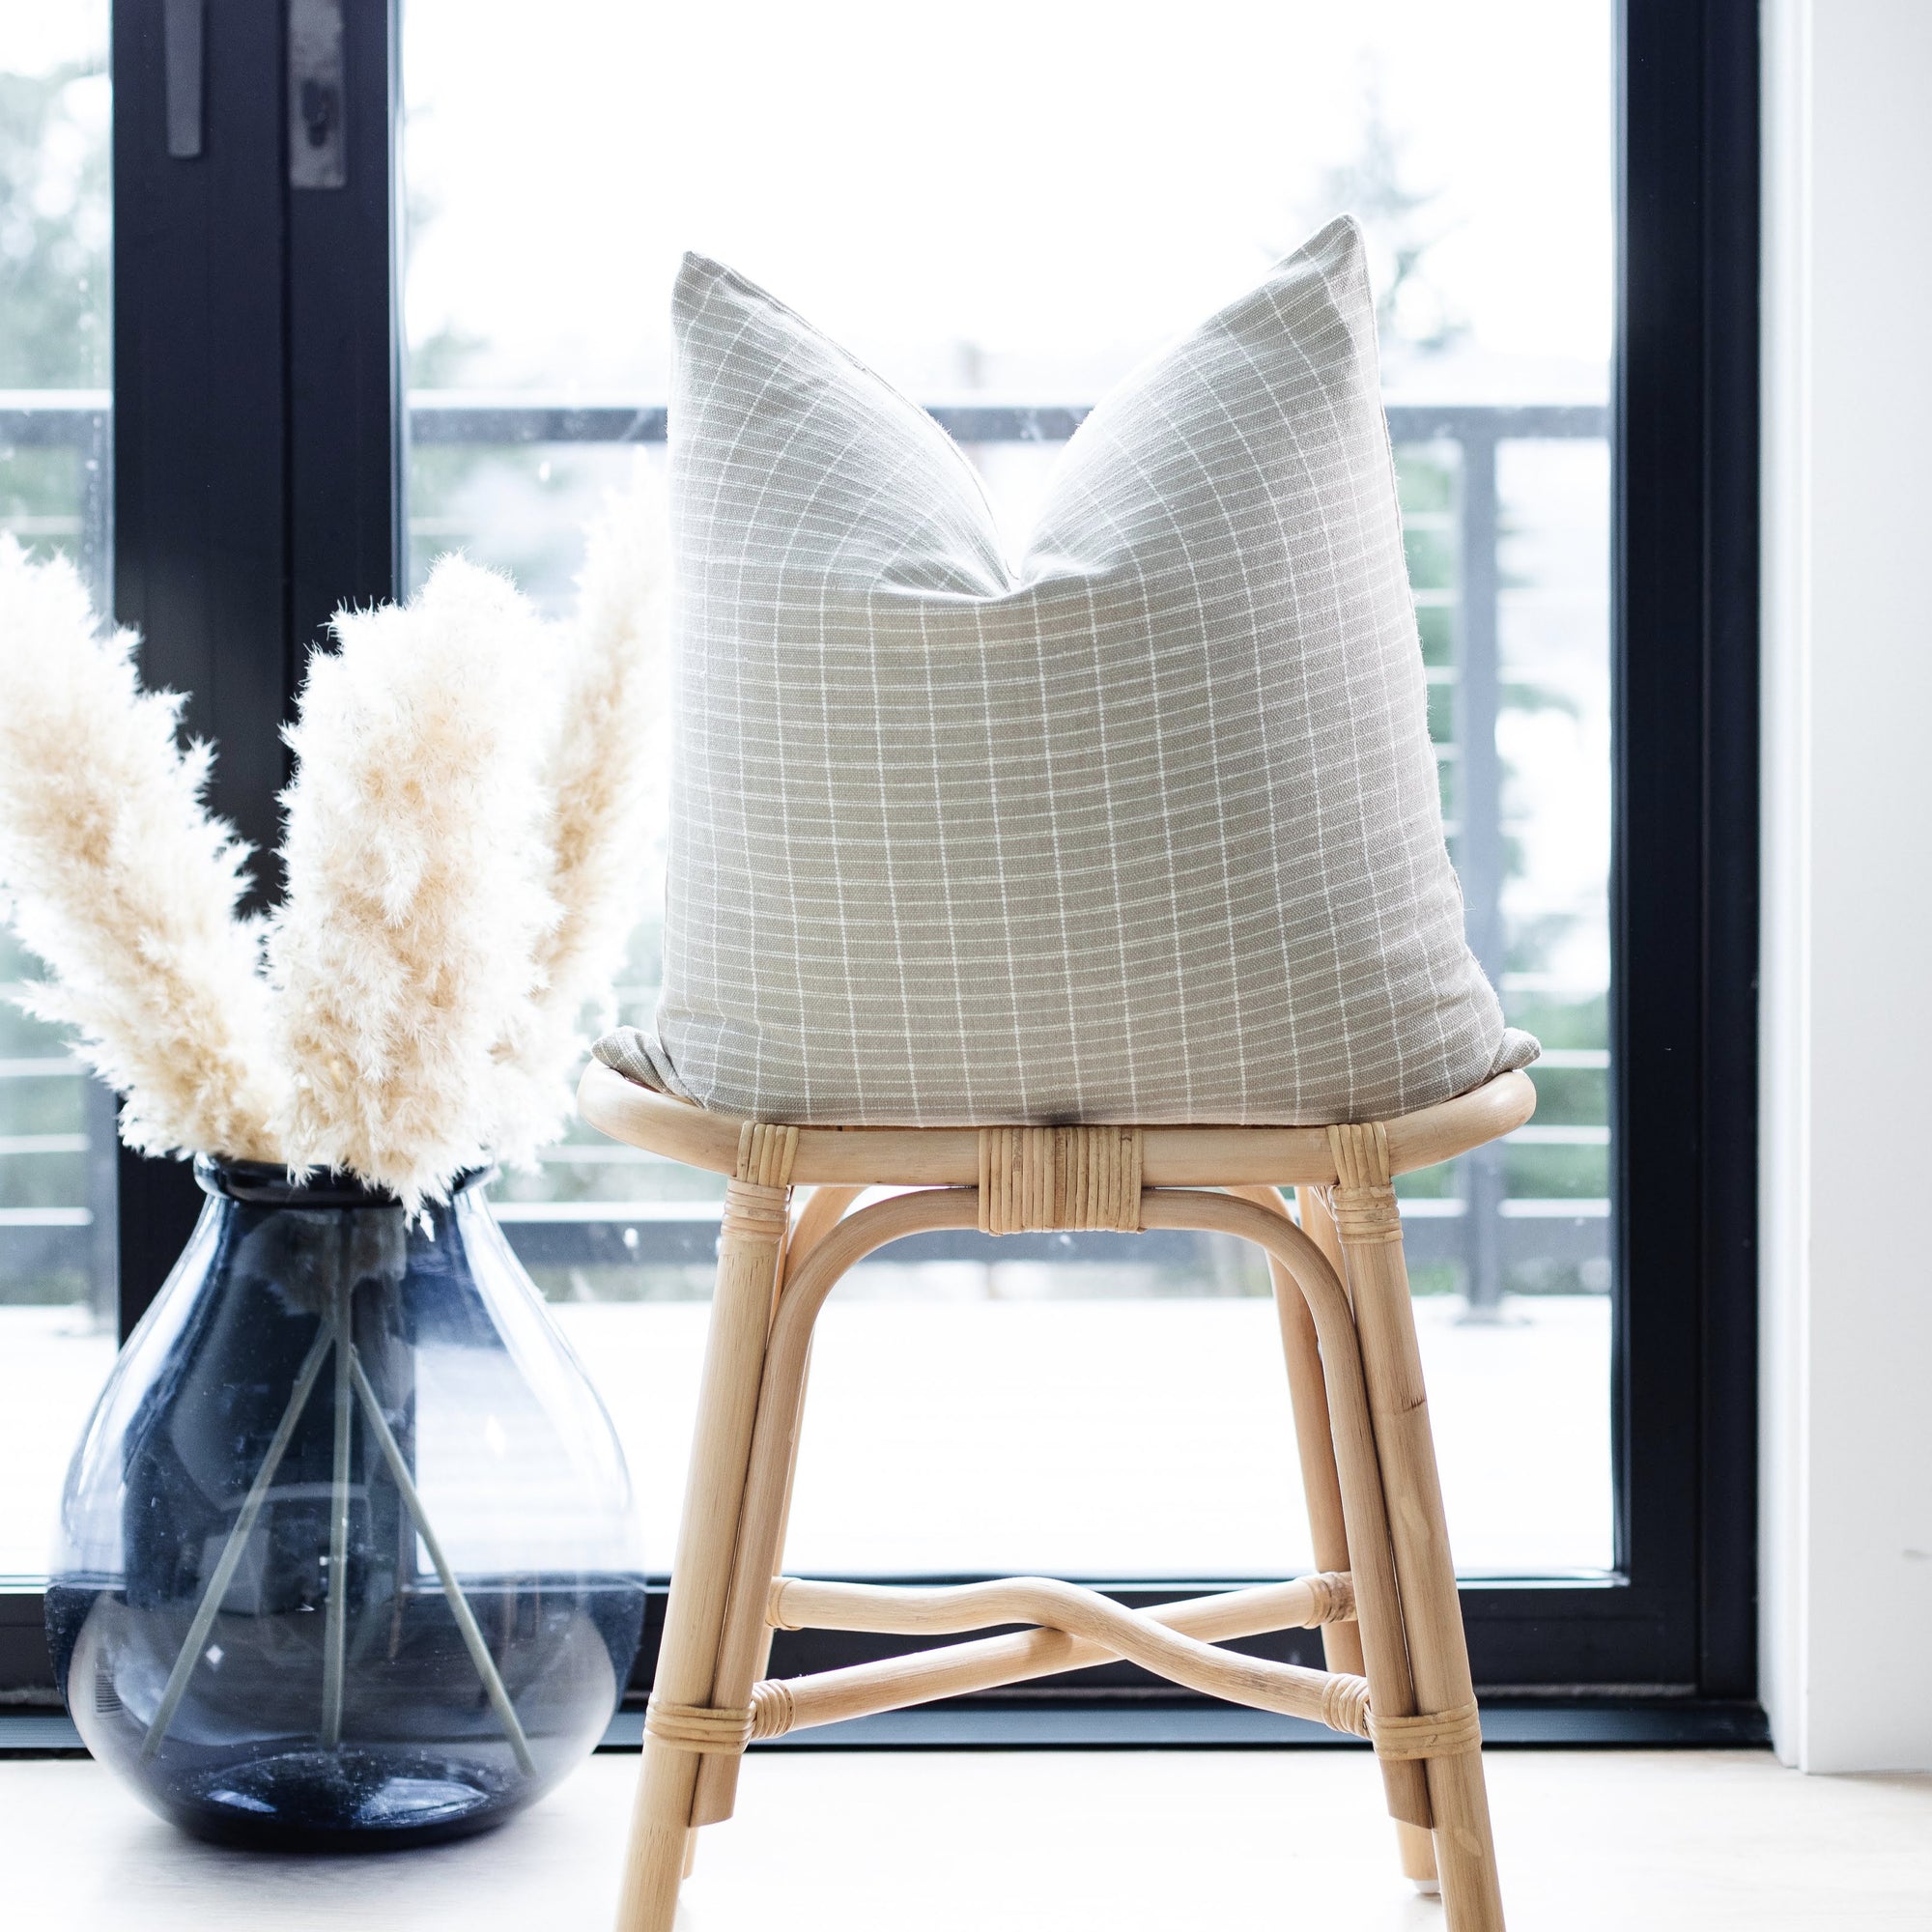 OLLY || Sand & Ivory Gridded Pillow Cover